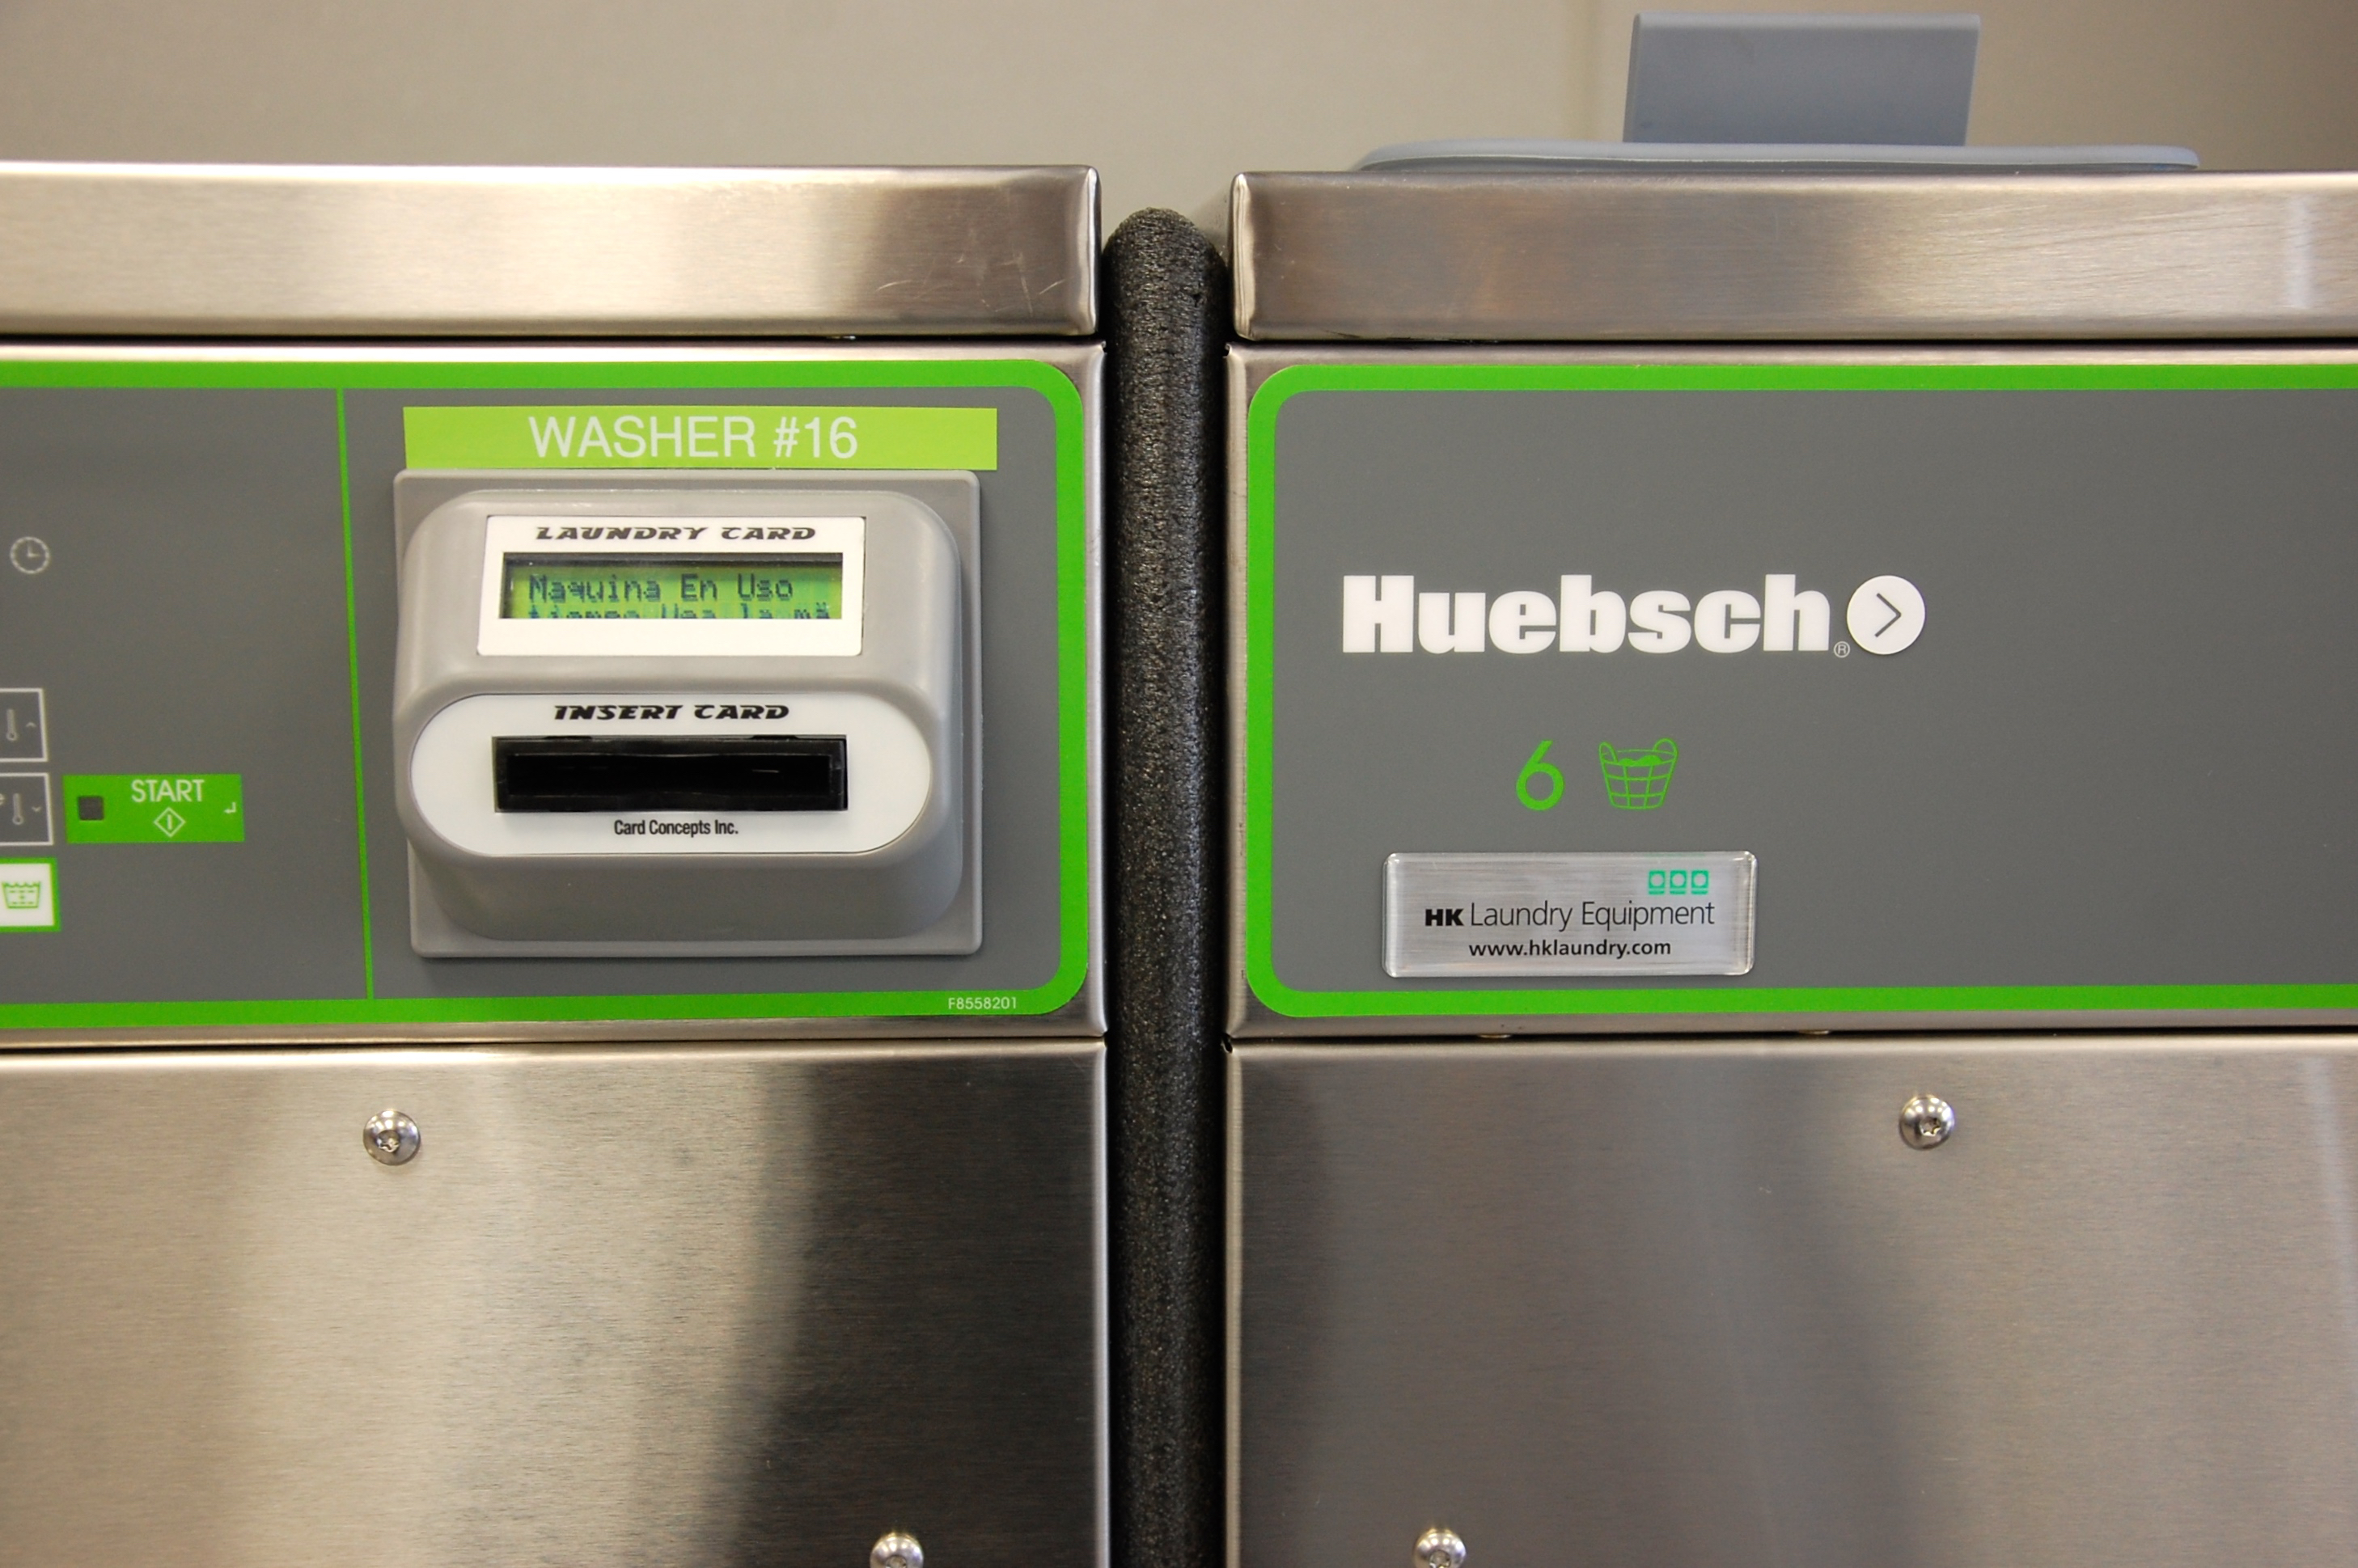 Huebsch City Scape Colorful Graphics, Note same color green for washer number.  Nice touch. Thumbnail